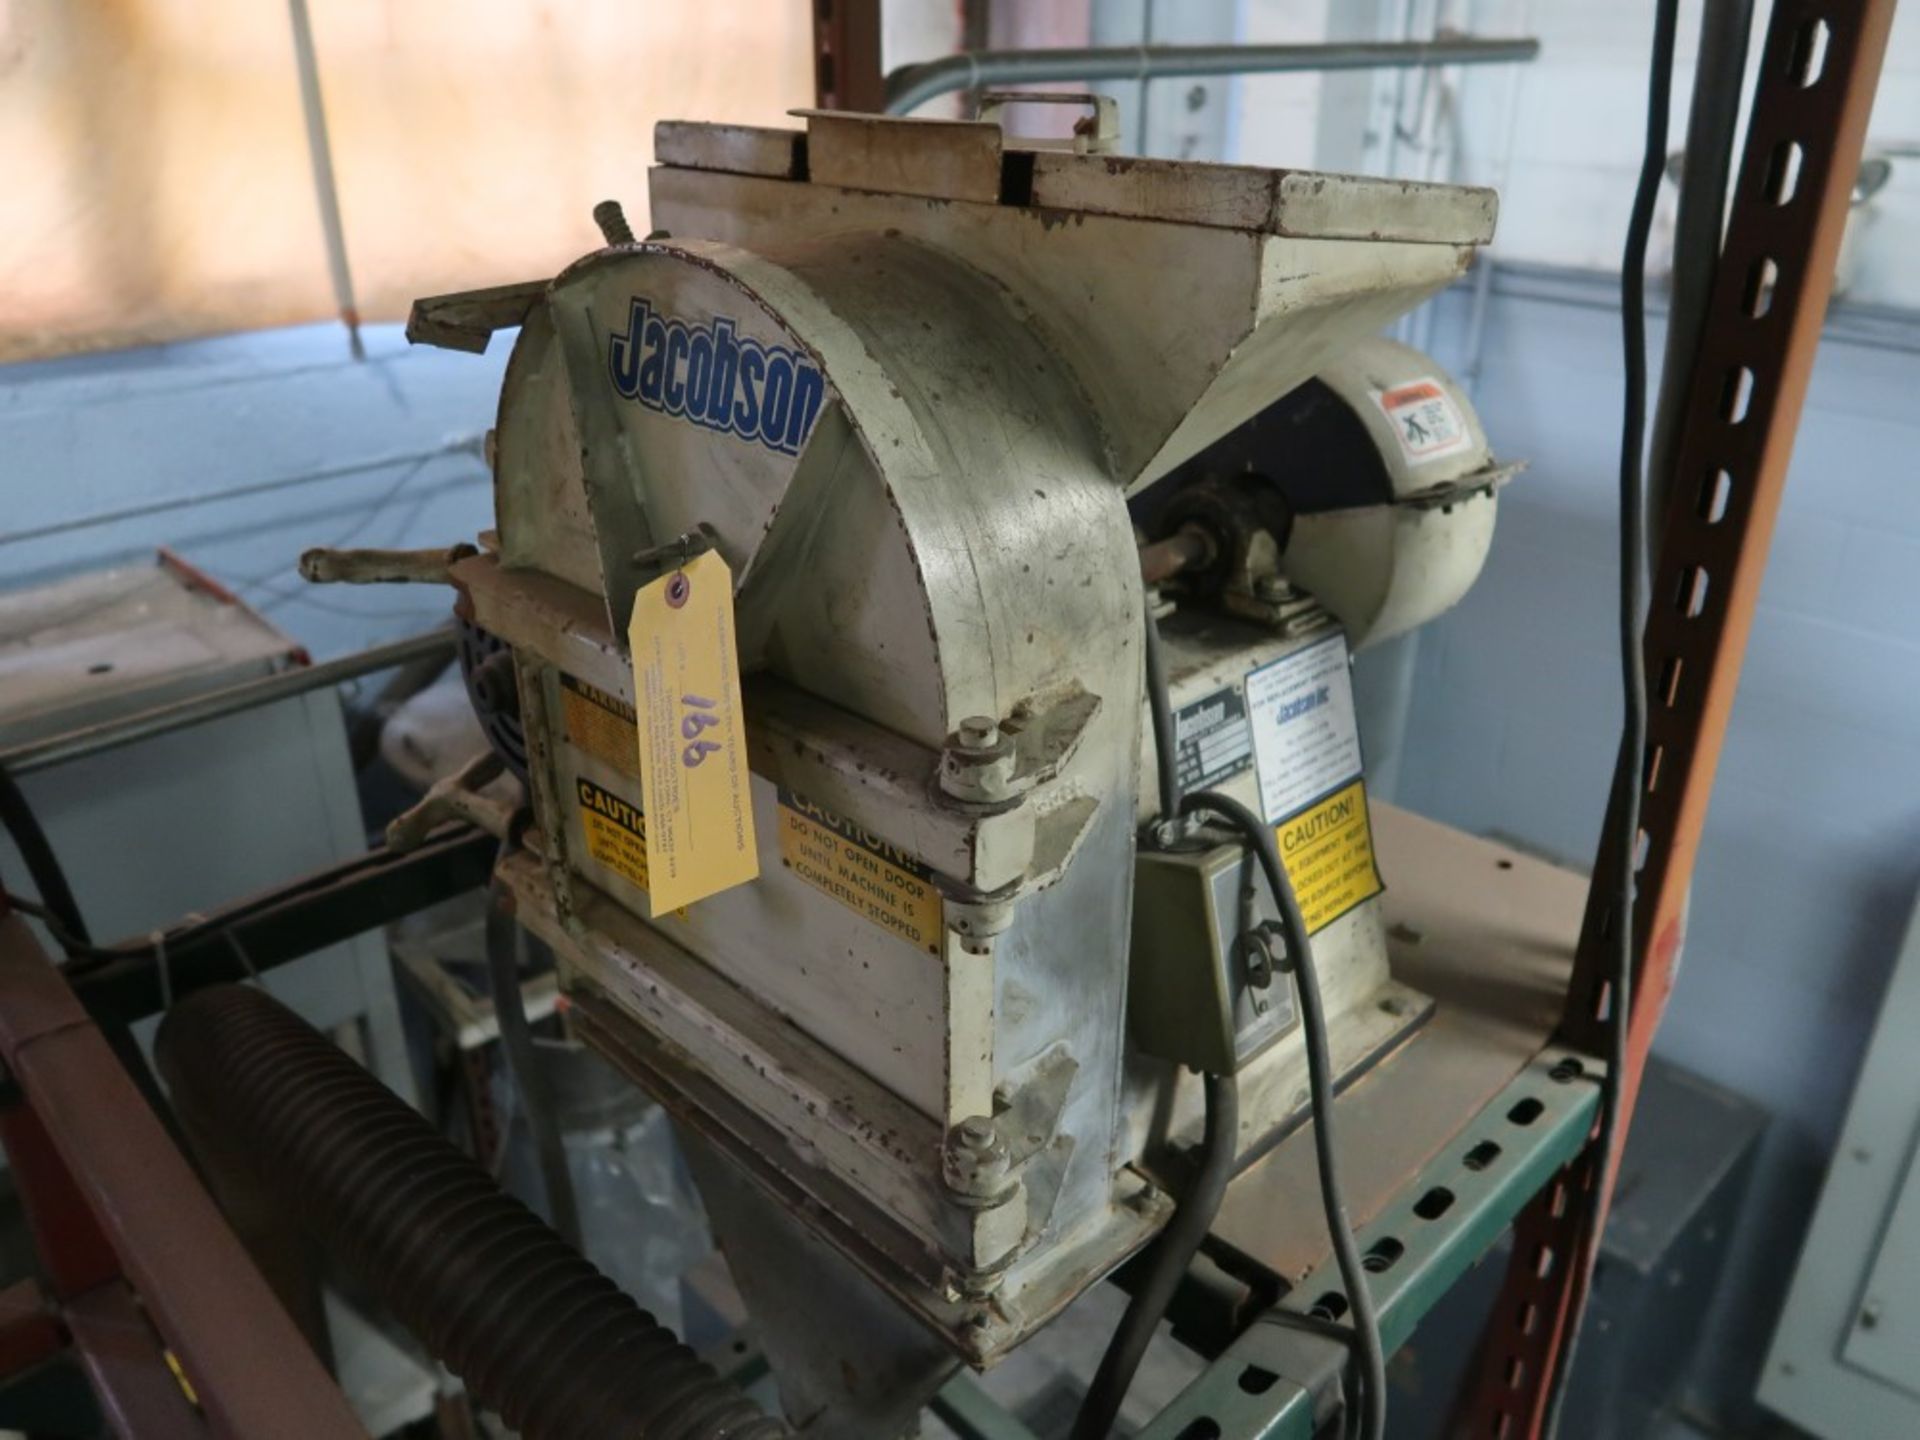 Jacobson Machinery Model 88B Vertical Mill S/N 37690 Max Speed 3600 (LOCATED ON MEZZANINE)